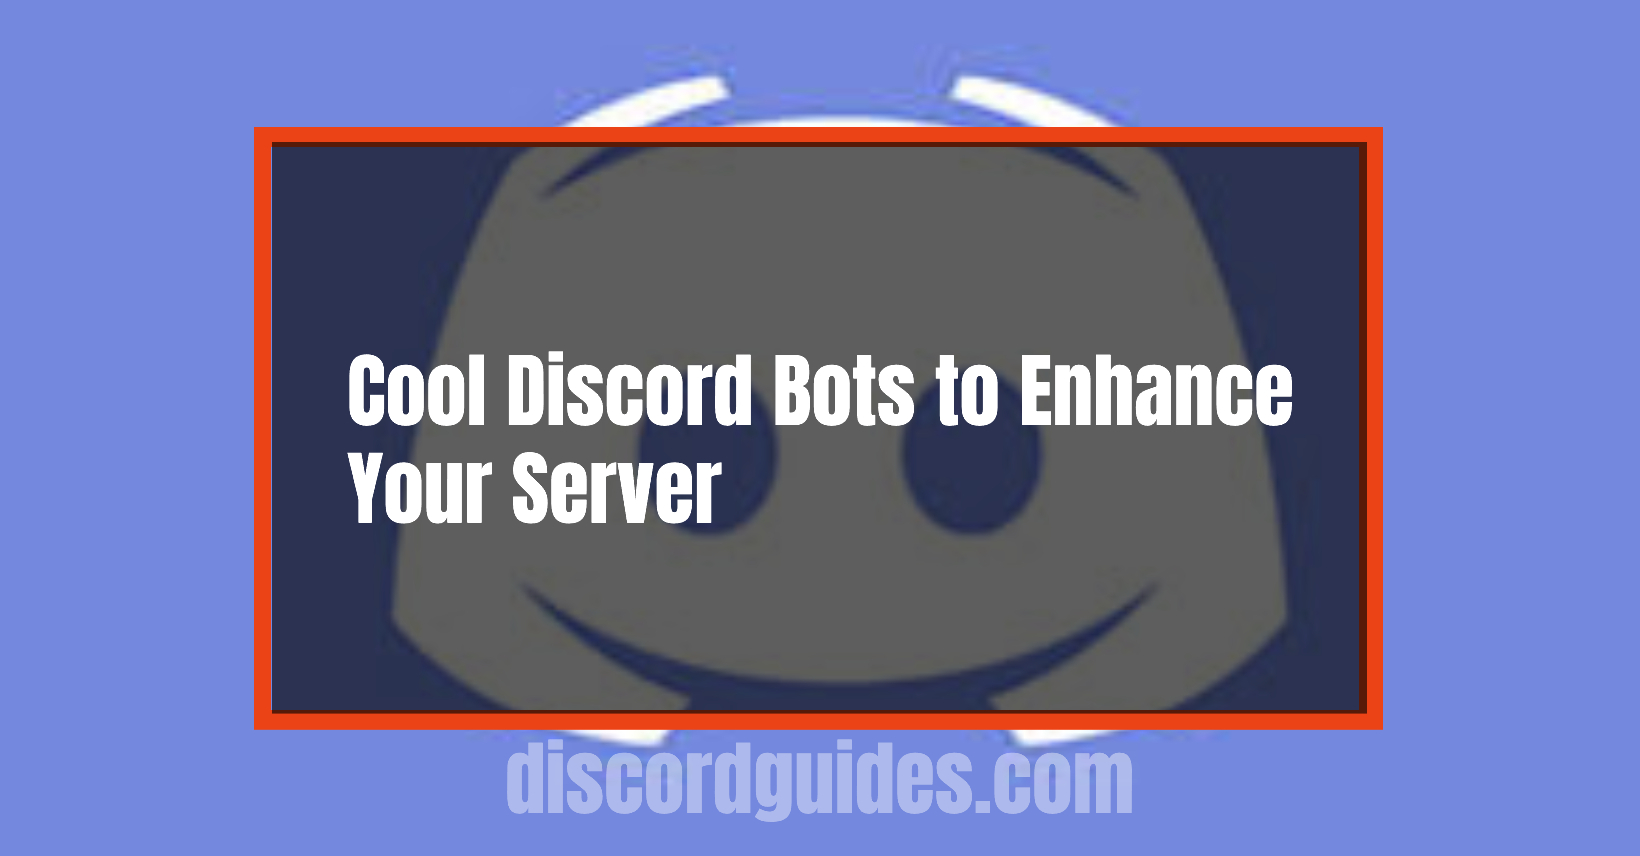 22 Best & Useful Discord Server Bots to Enhance your Discord Server